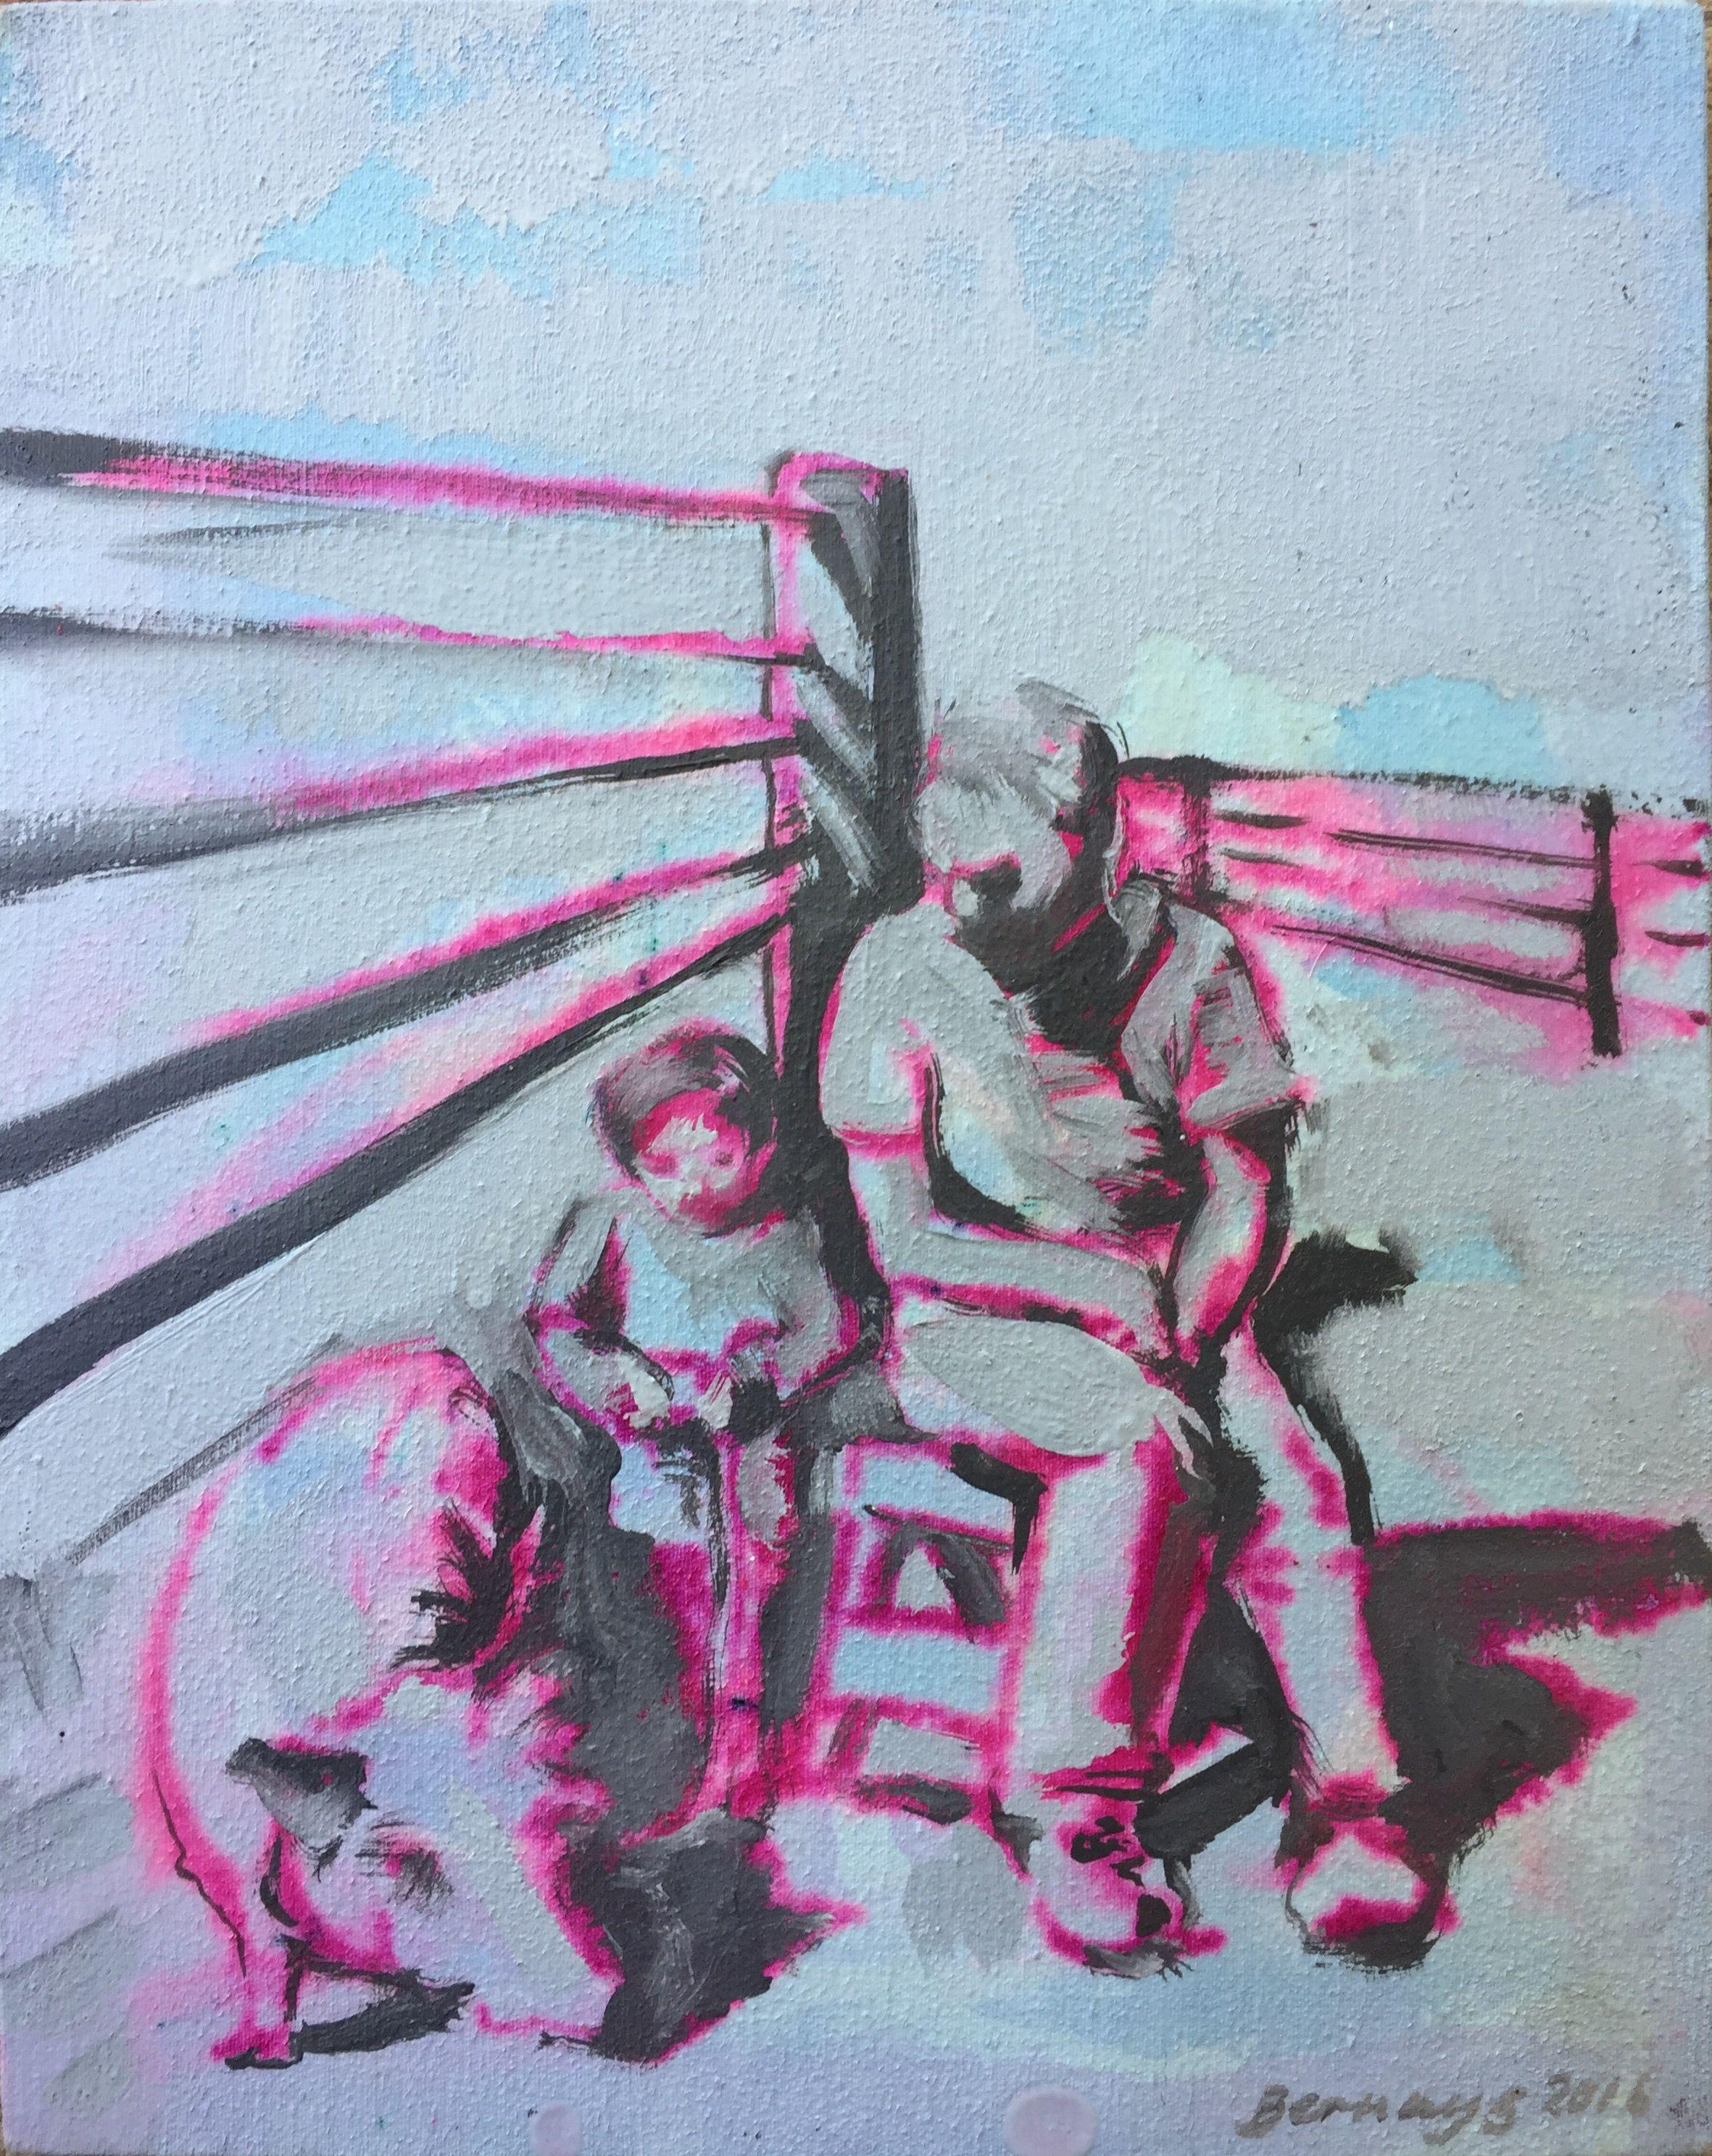 This is a small gray and pink painting. The bucolic subject of a little boy with his pig and father is referenced with the bright pink felt tip pen I used for the initial sketch. Secured with a layer of varnish, and detailed with oil paint. This is